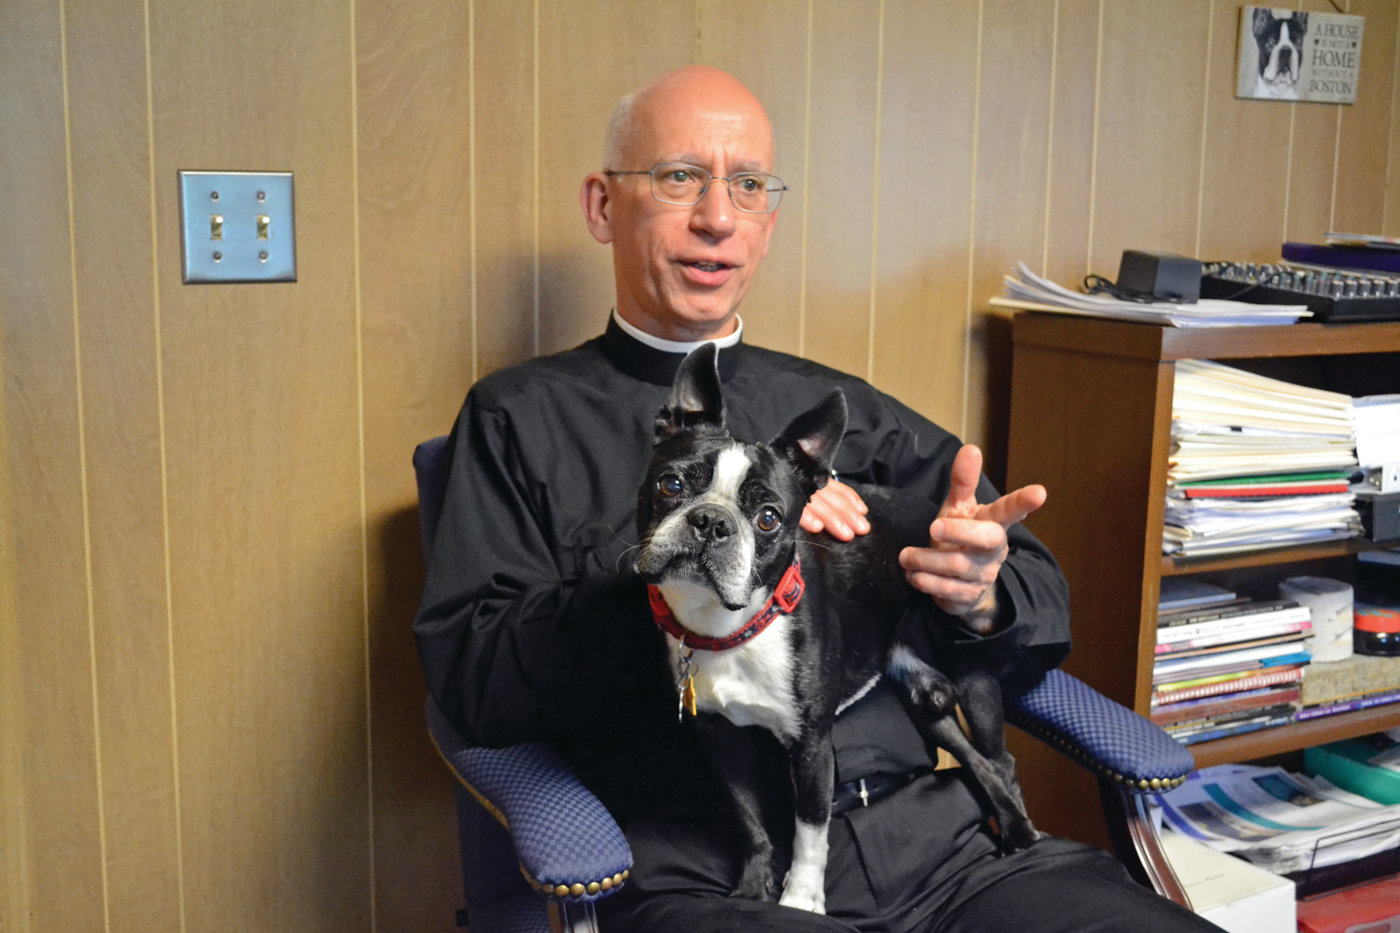 PASTORAL PET: Father Andrew Messina inside his office at St. Timothy Church with his trusty companion, Max the Boston terrier.